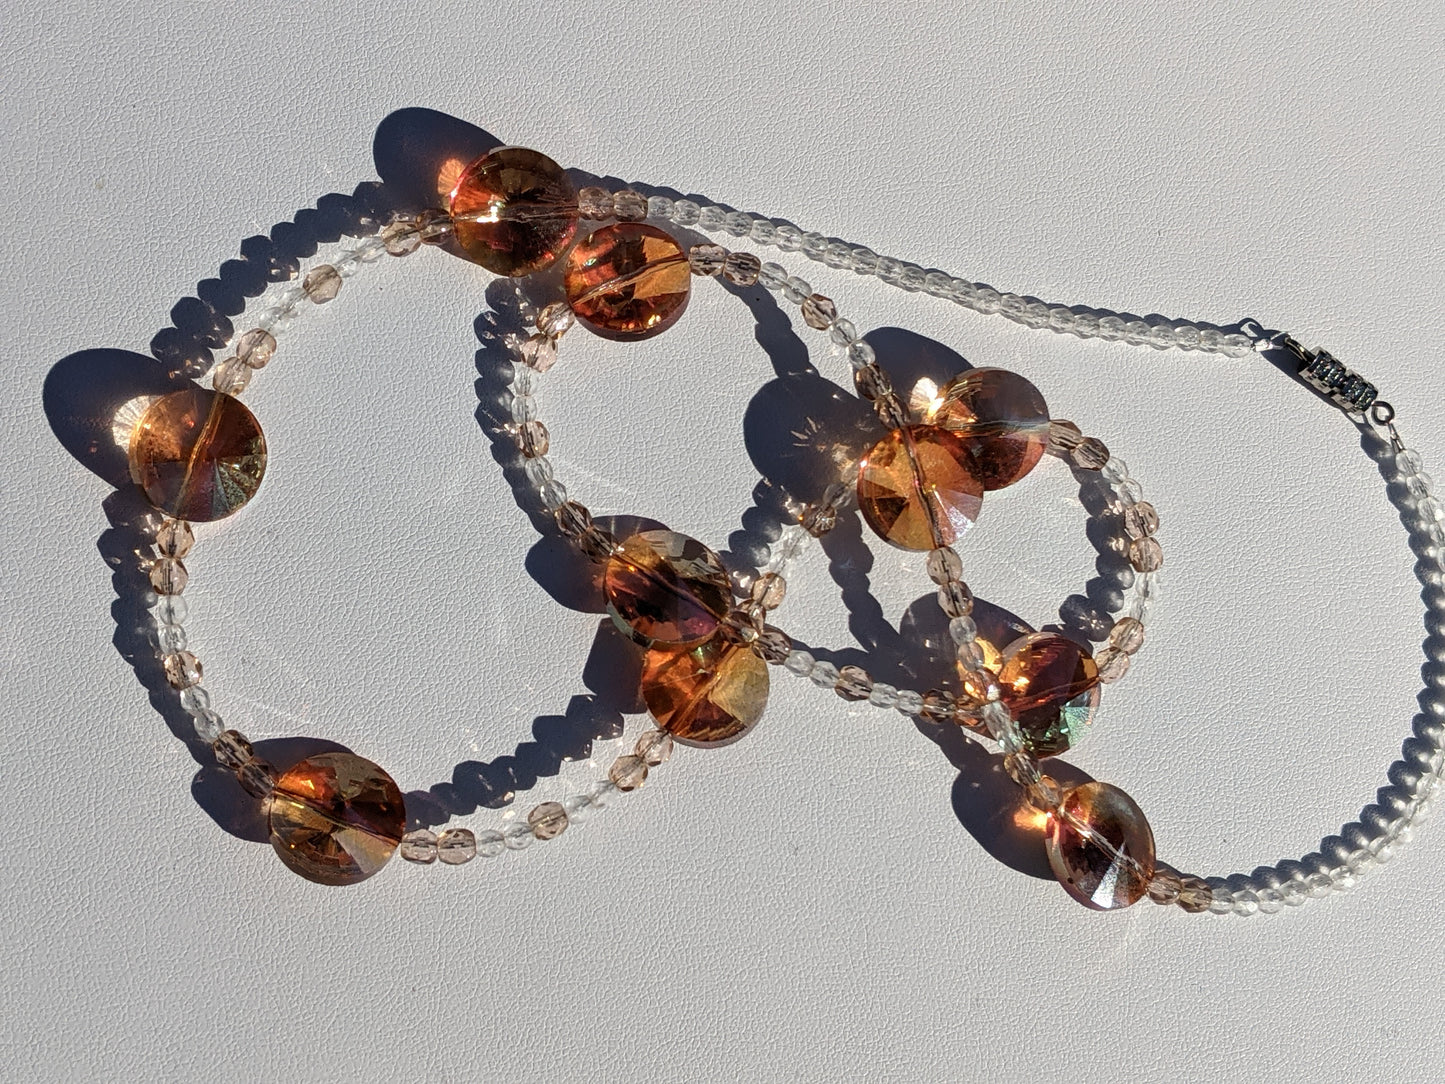 Peach Crystal Prisms and Glass Bead Necklace